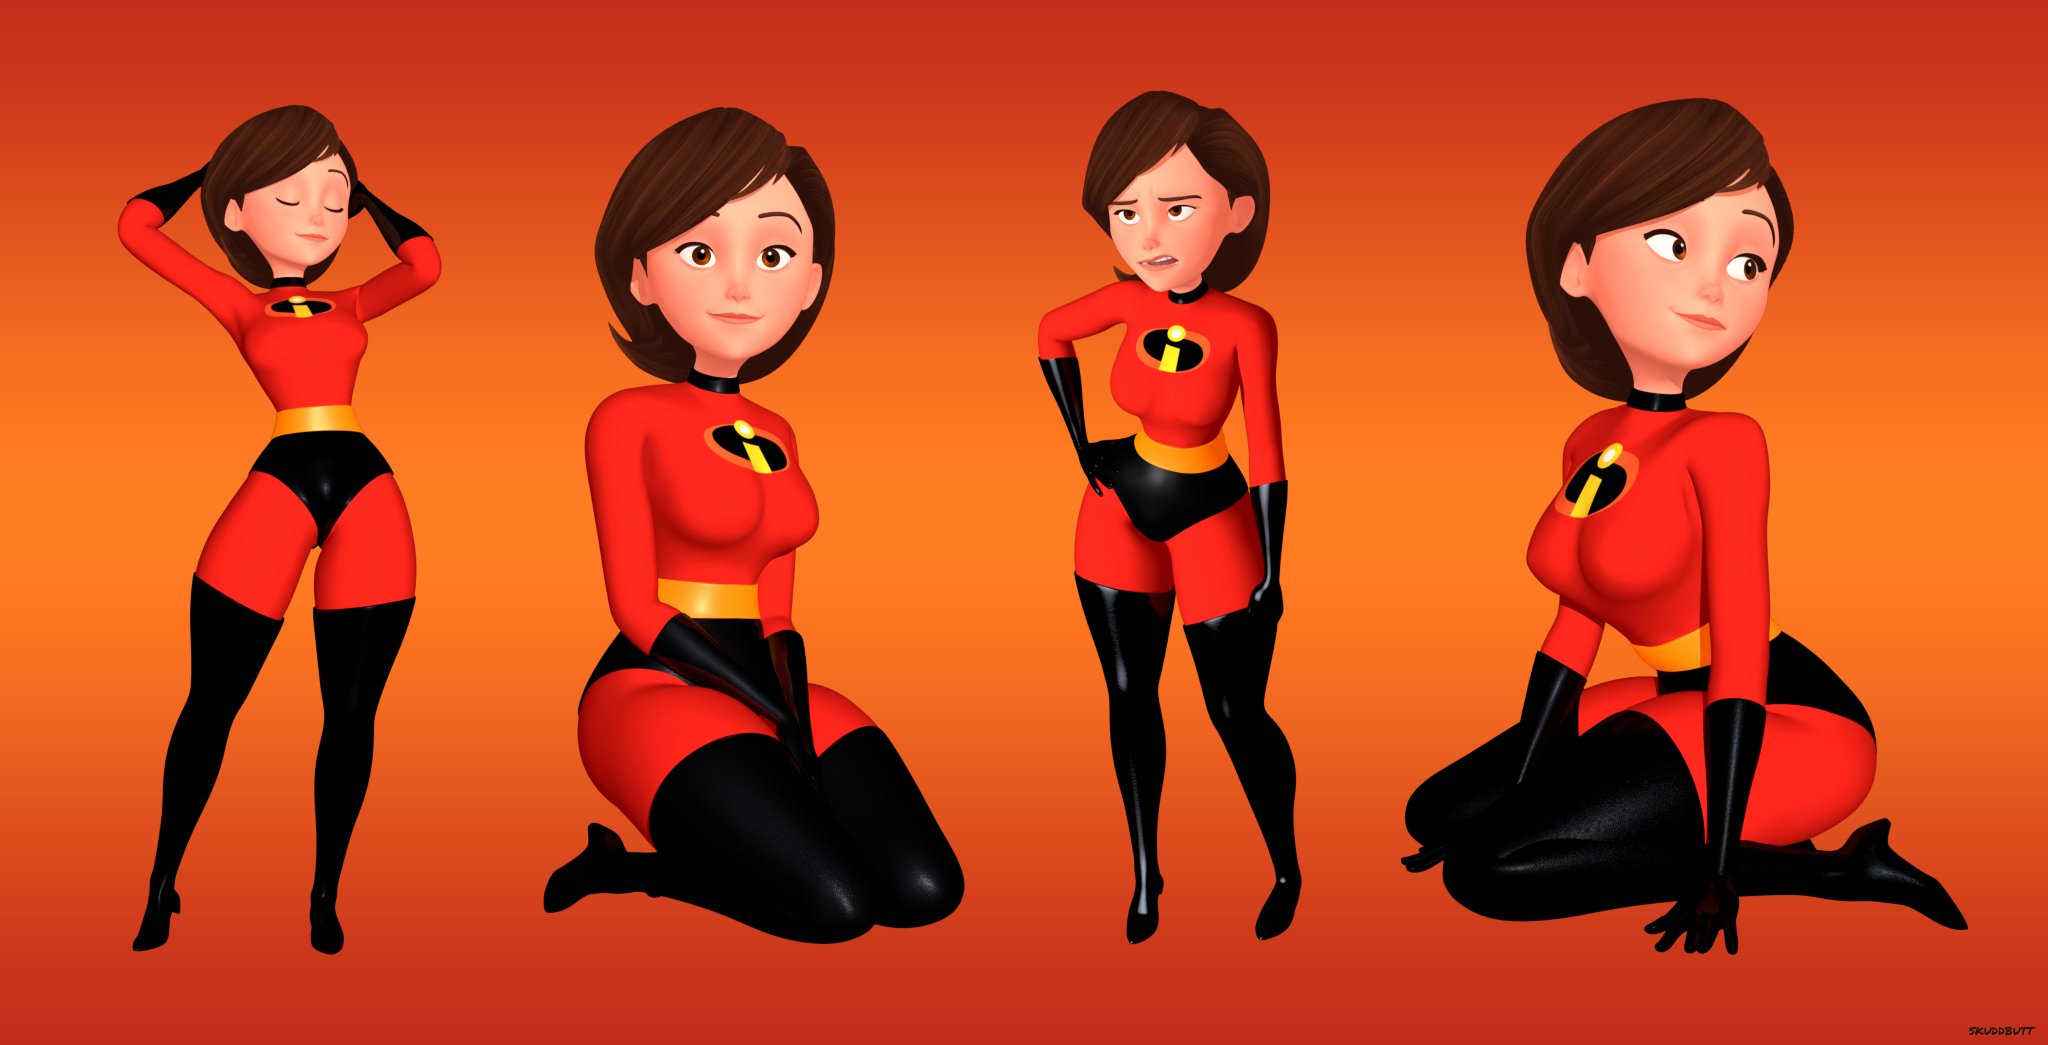 Skudd On Twitter My Helen Parr Model Is Finished Check Her Out Here